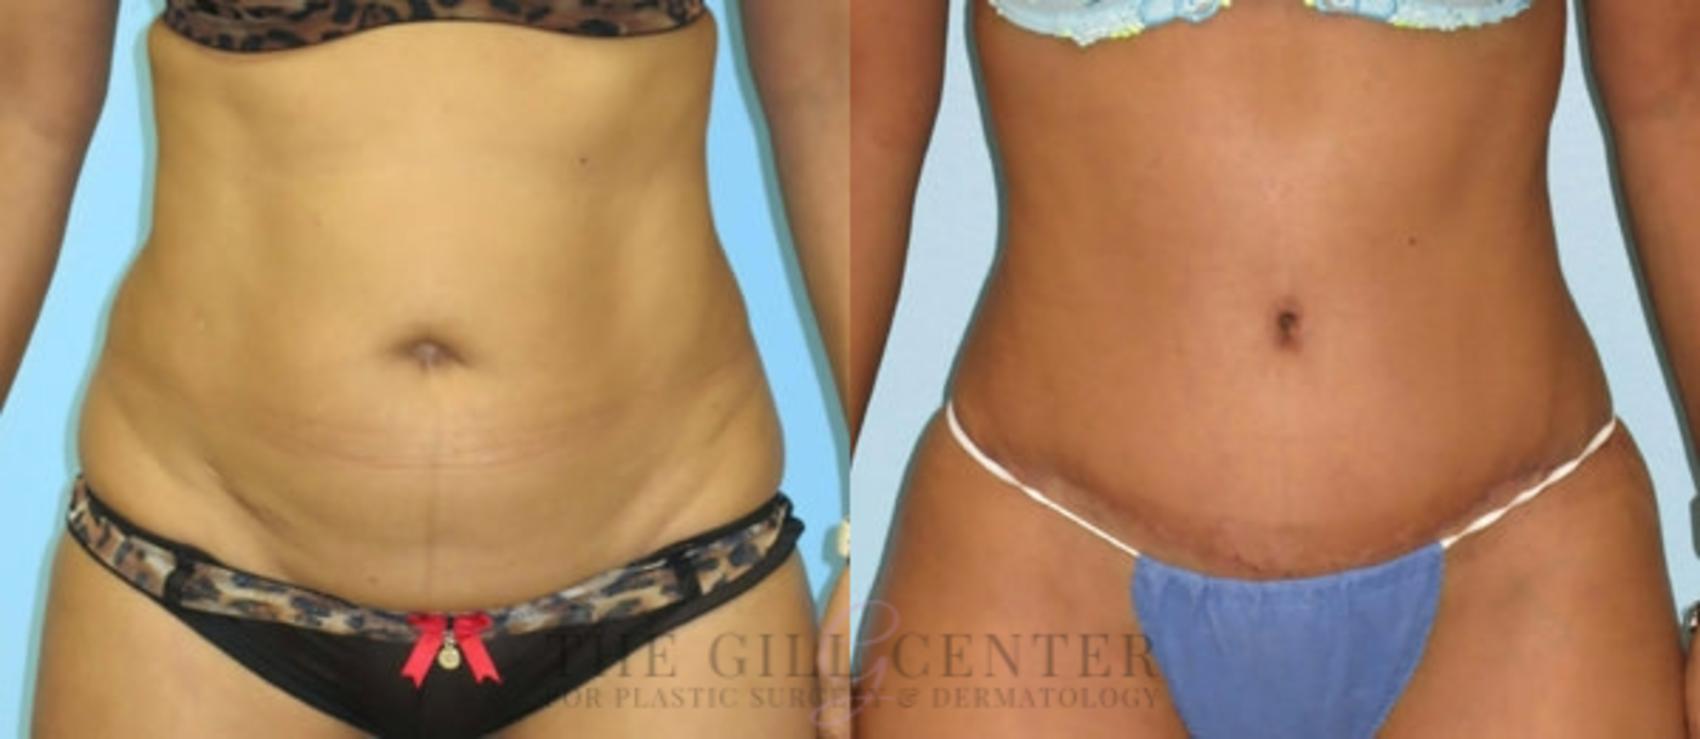 Tummy Tuck Case 272 Before & After Front | The Woodlands, TX | The Gill Center for Plastic Surgery and Dermatology